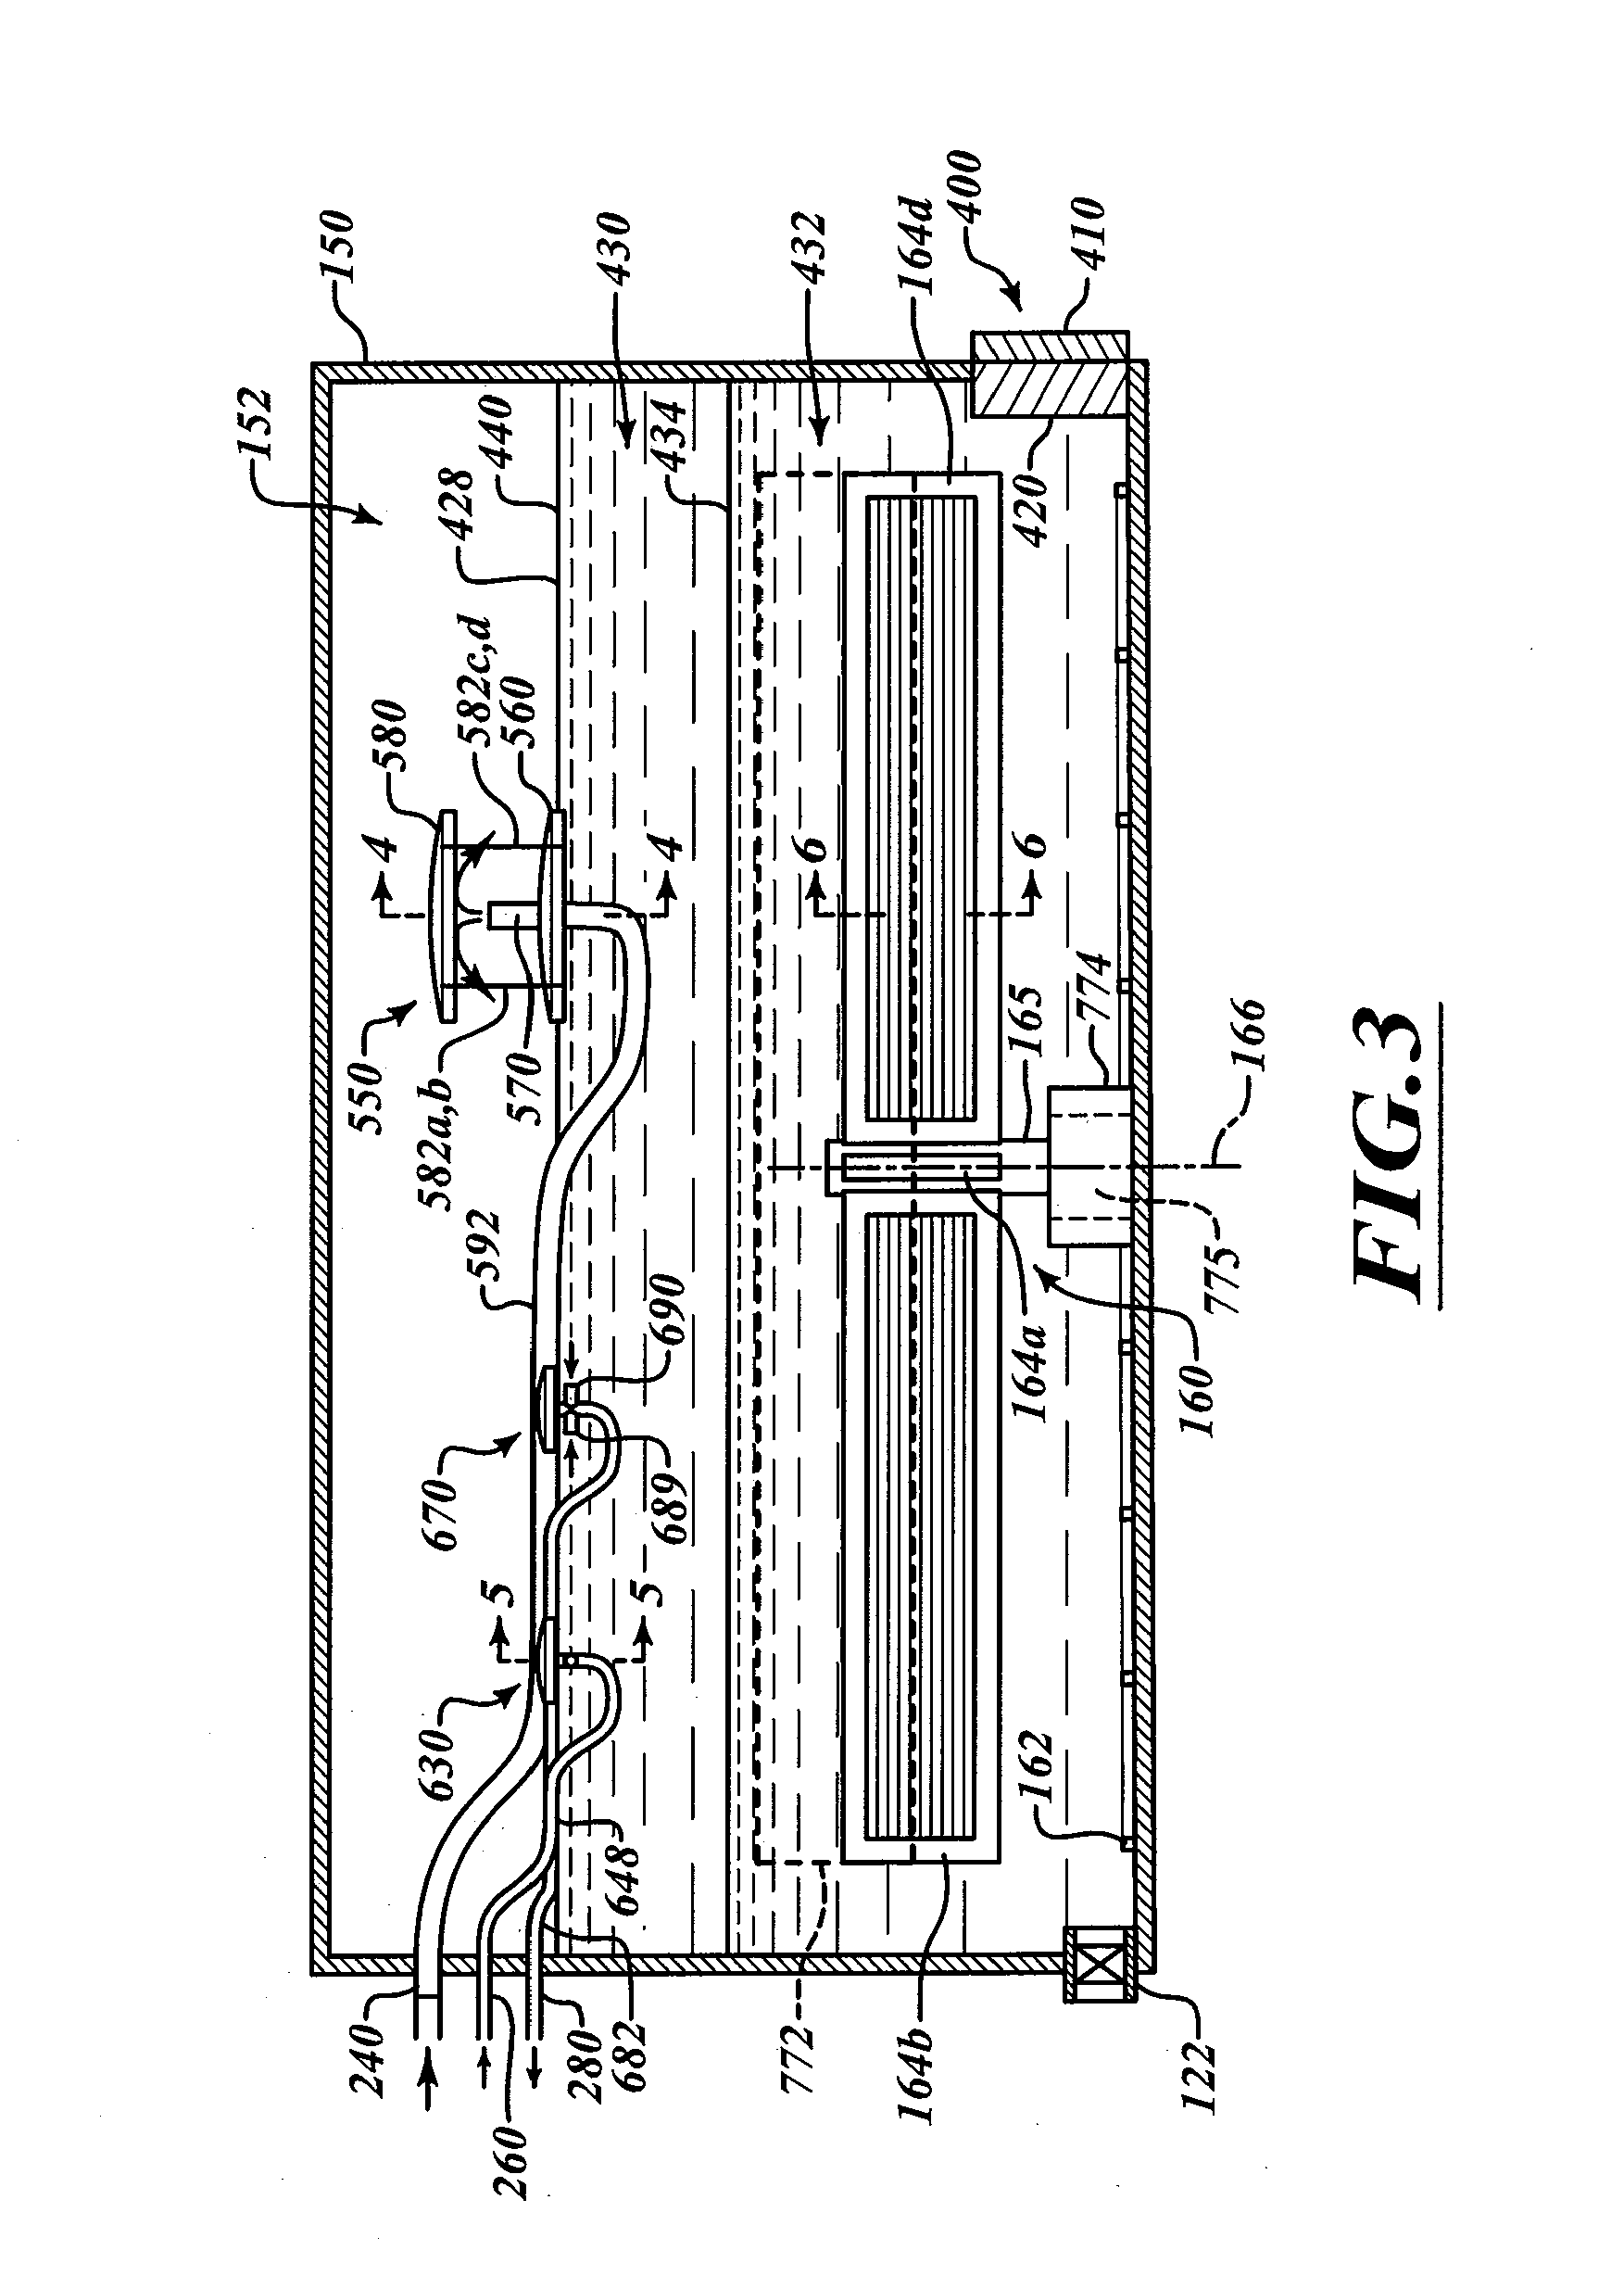 Method and system for processing a biomass for producing biofuels and other products